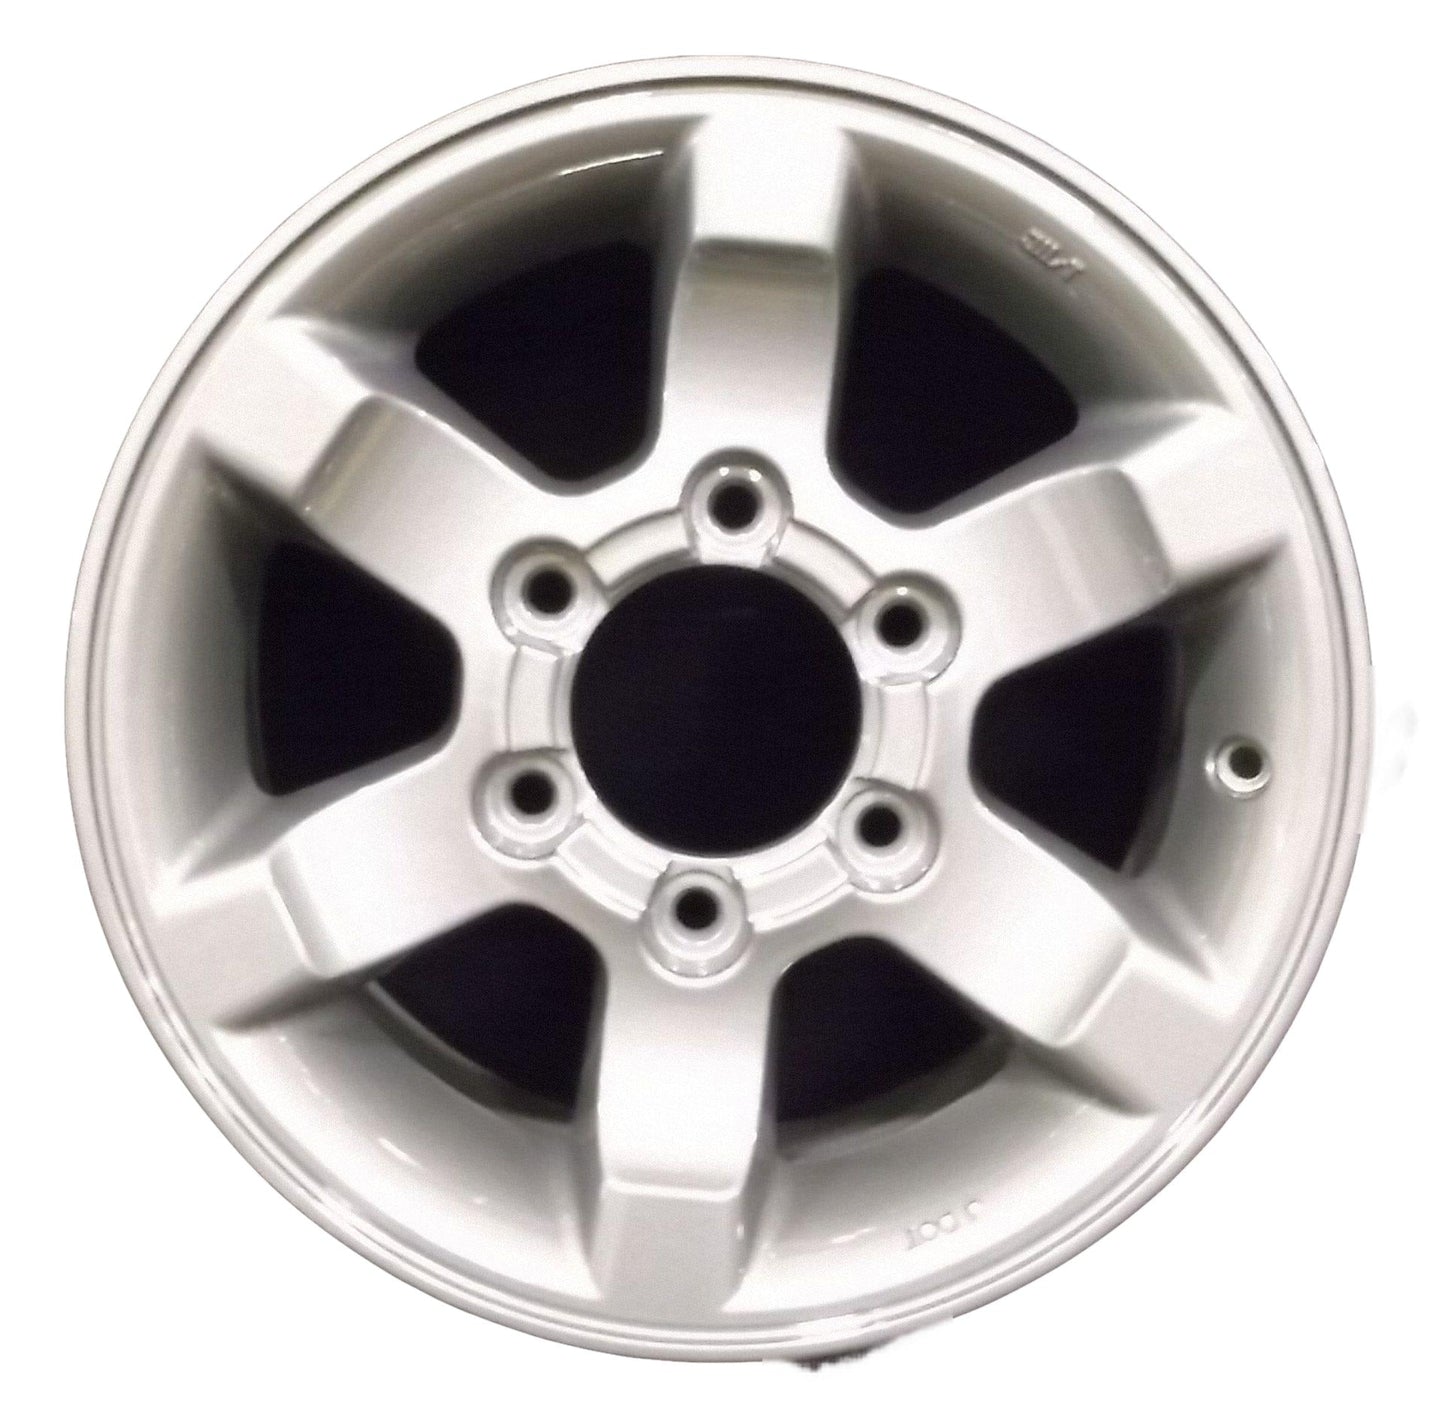 Nissan Frontier  2001, 2002, 2003, 2004 Factory OEM Car Wheel Size 15x7 Alloy WAO.62406.LC26.FF